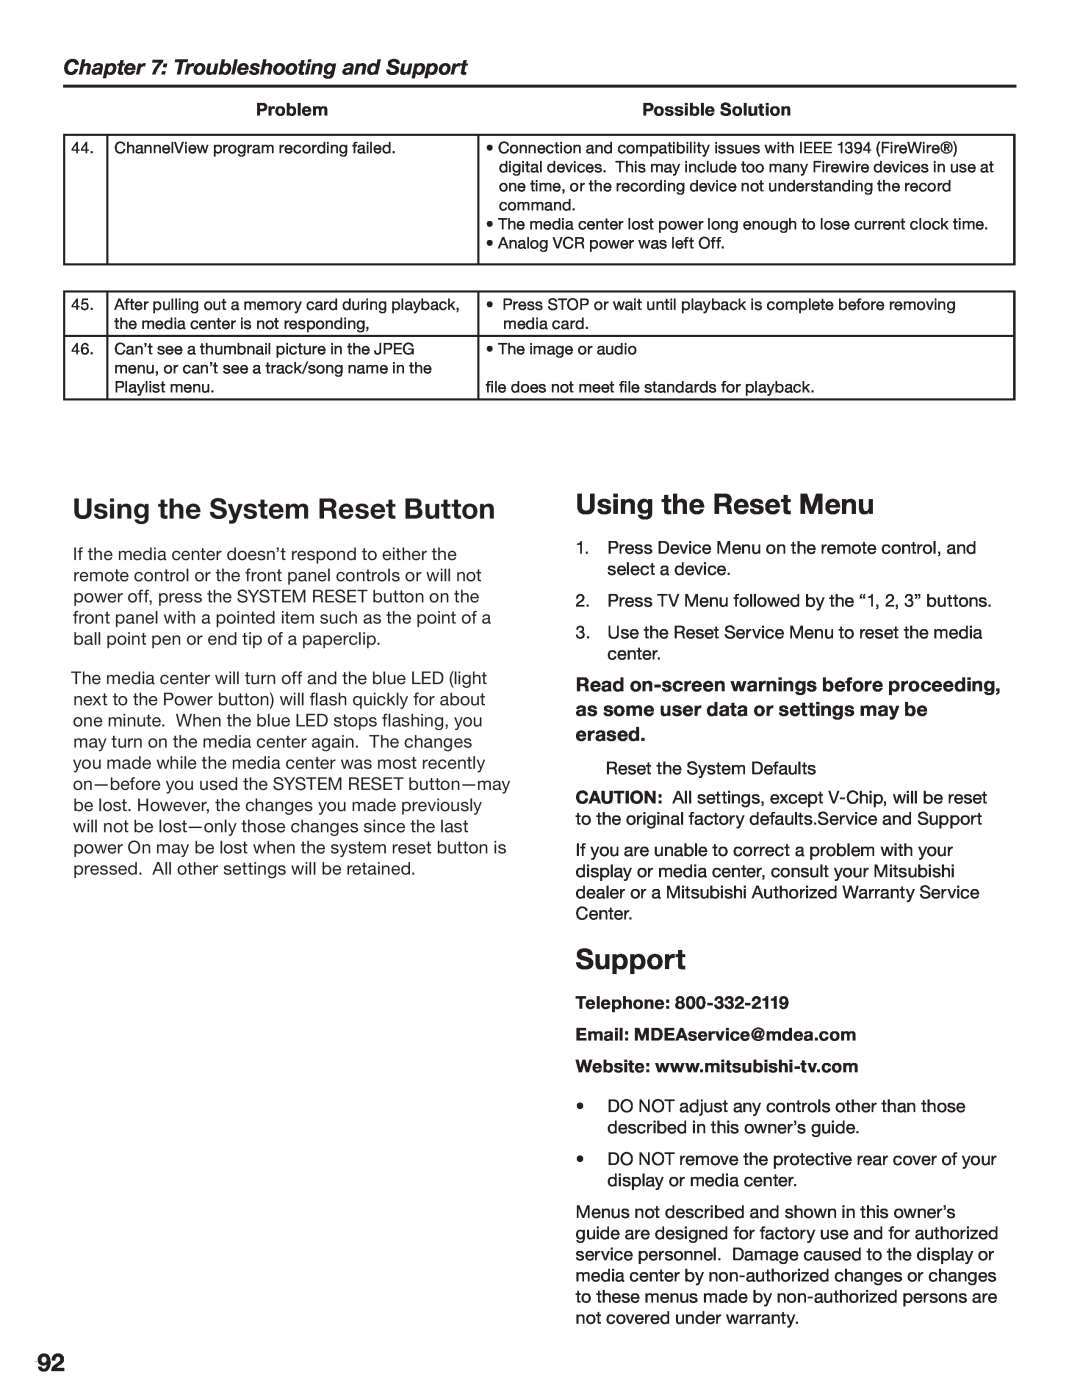 Mitsubishi Electronics LT-3280 manual Using the System Reset Button, Using the Reset Menu, Troubleshooting and Support 